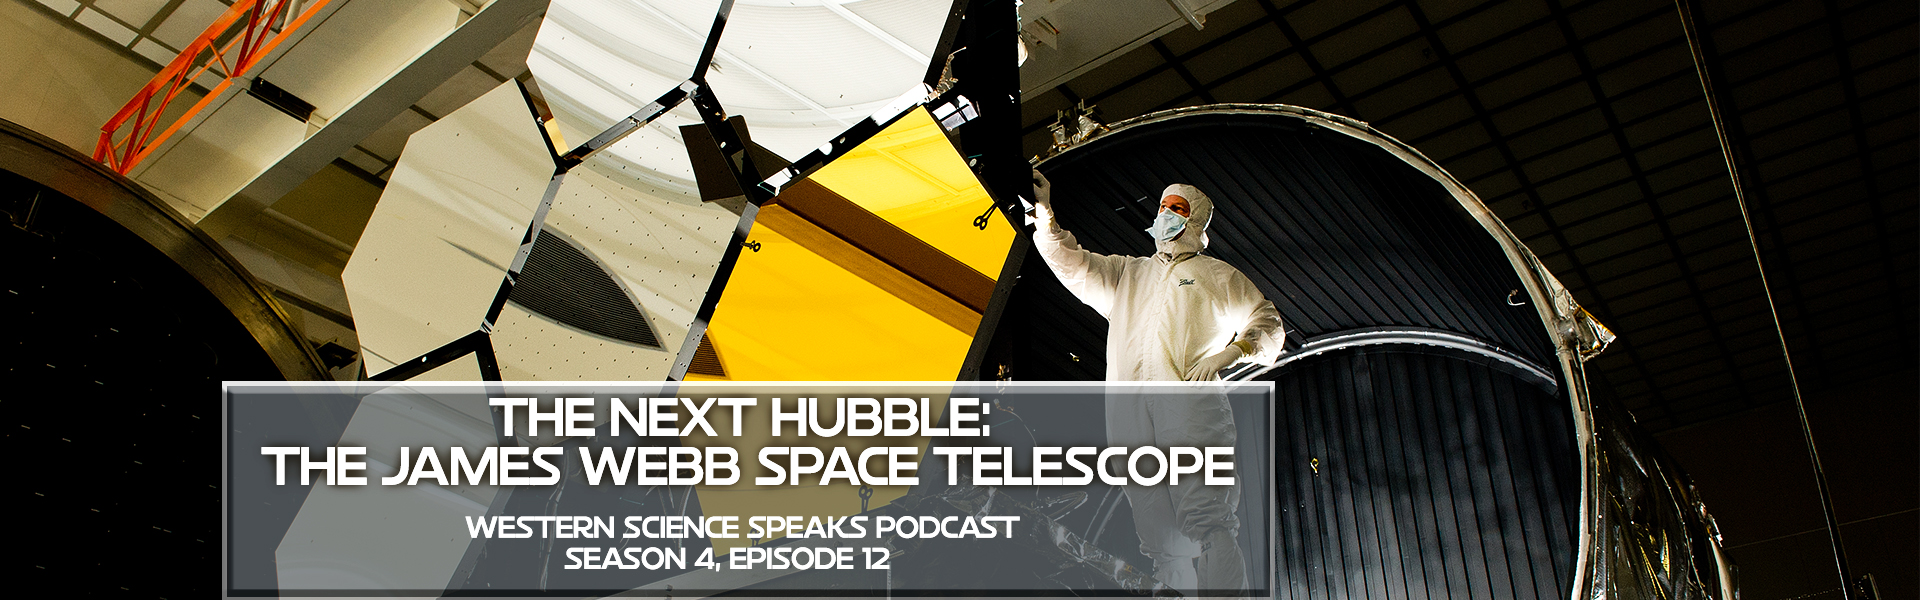 Hubble Telescope Mirrors. Listen to our podcast episode on the James Webb Telescope.